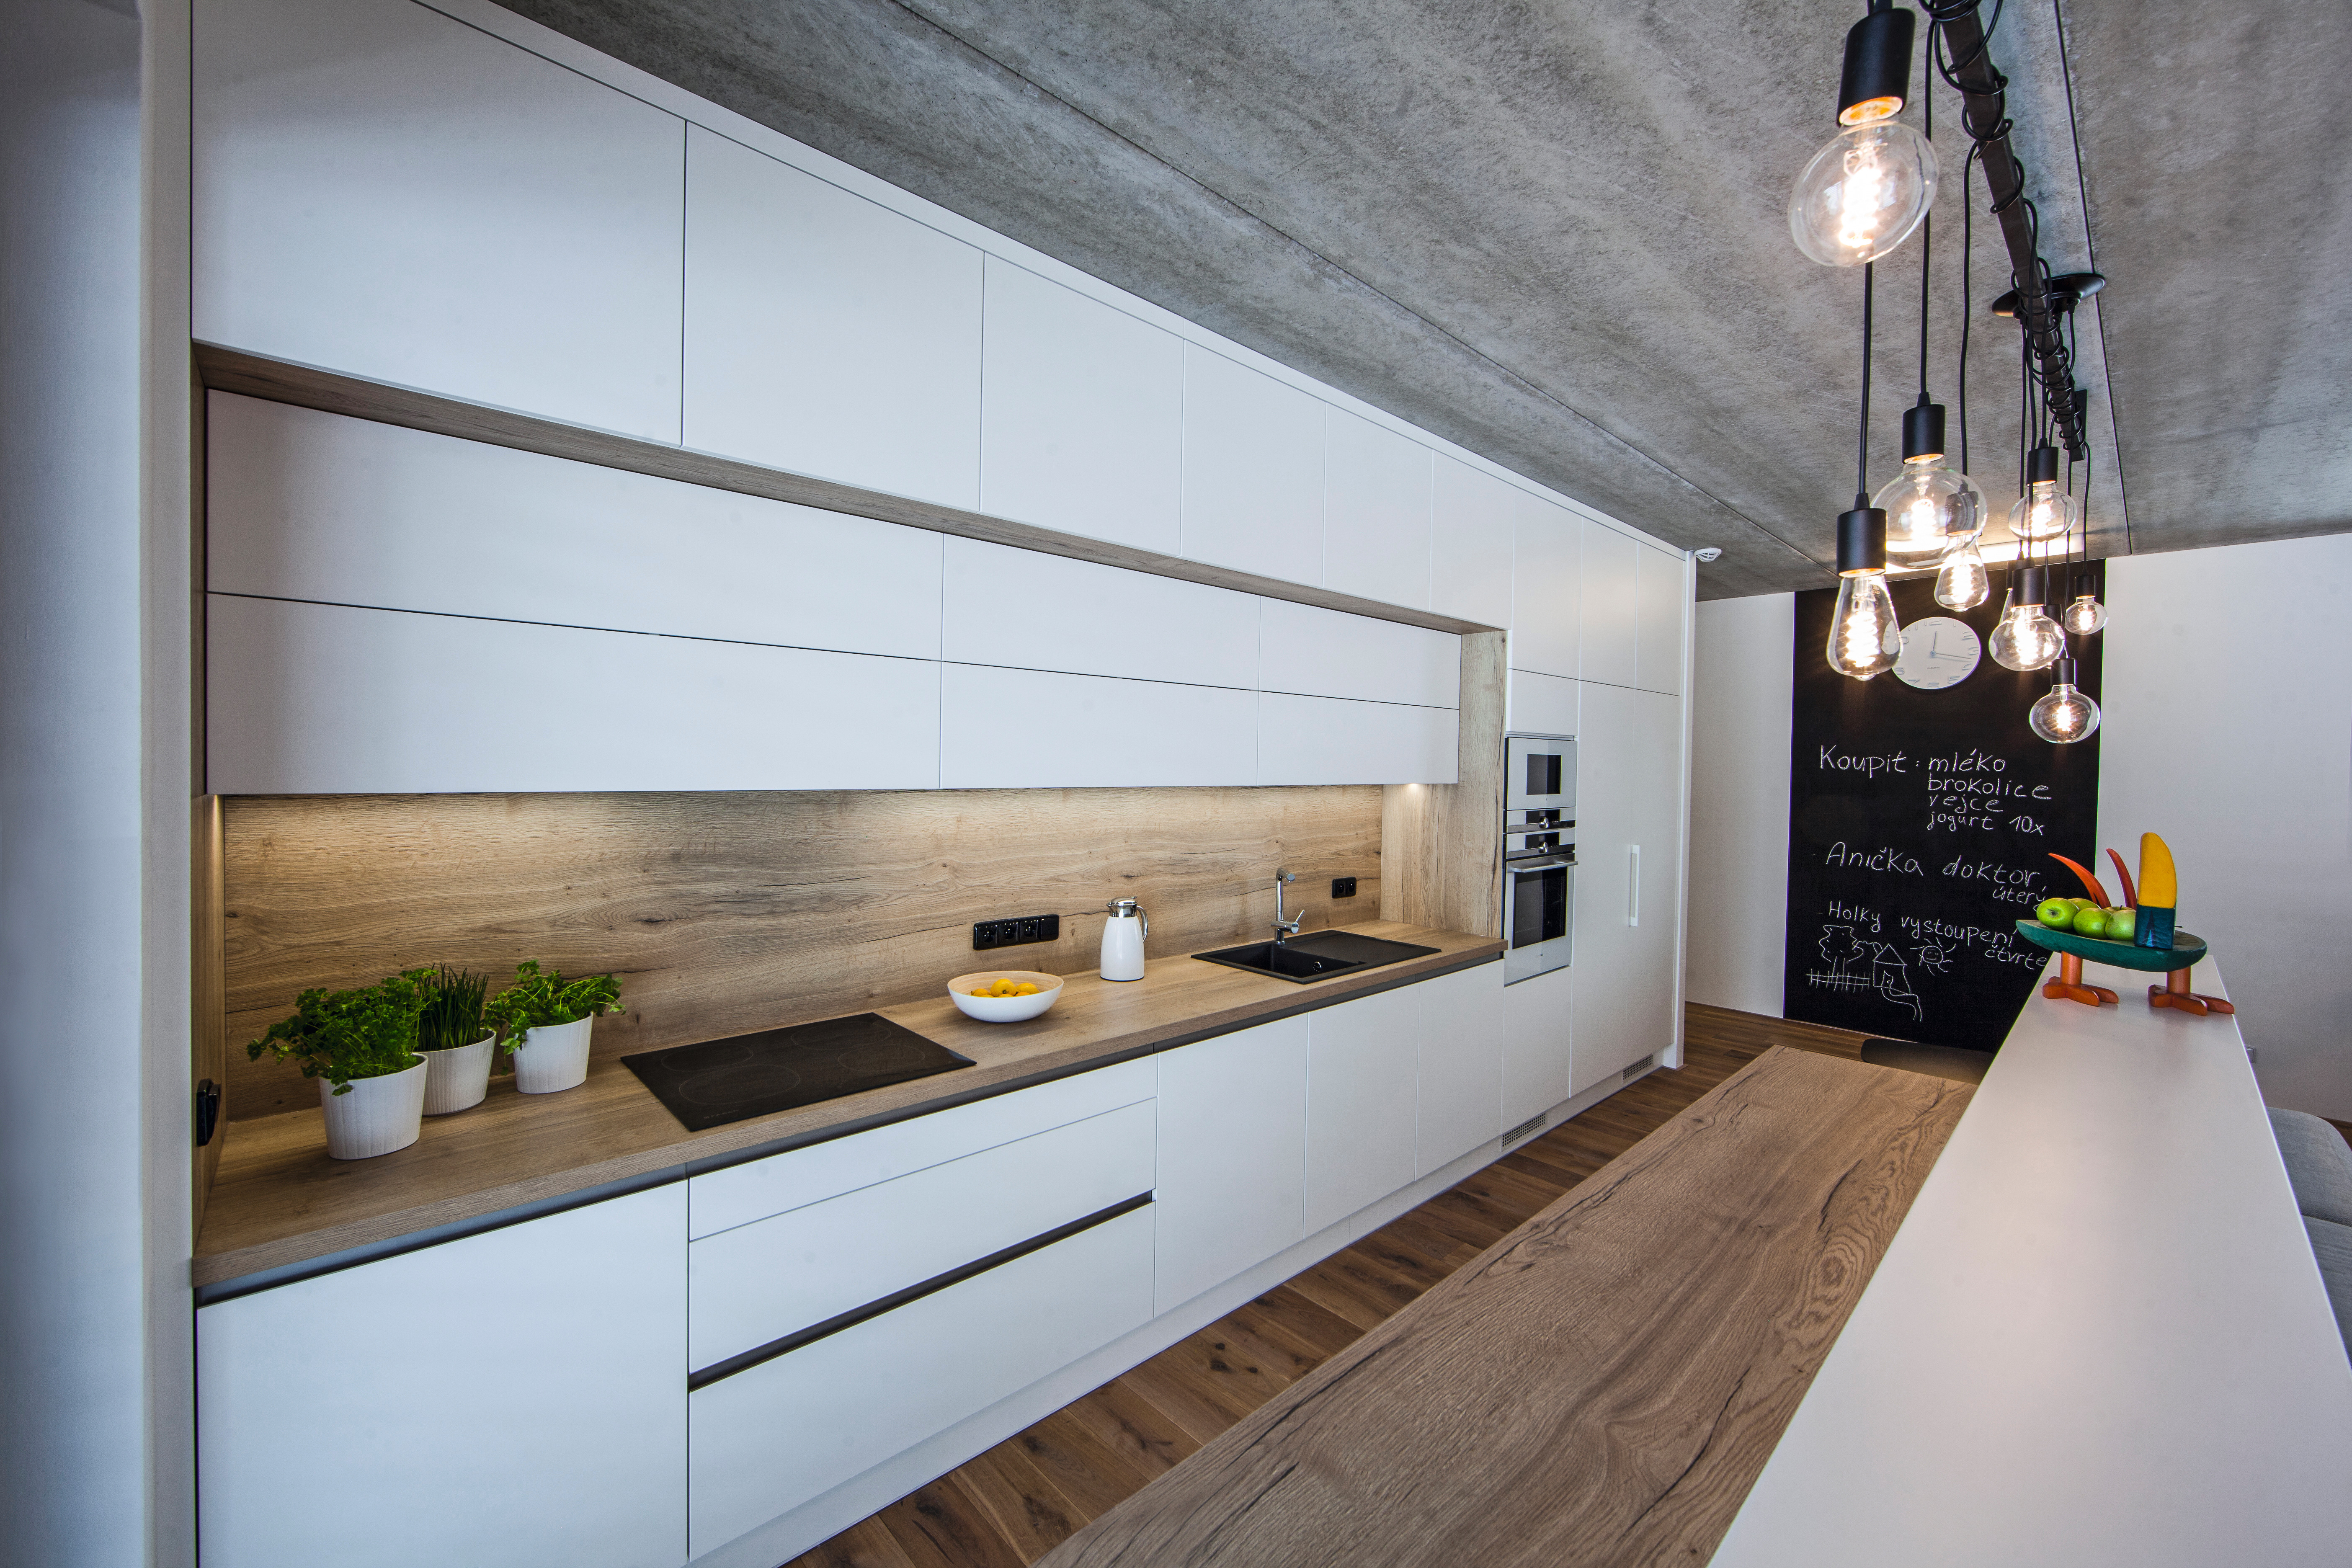 The oak decor creates an attractive contrast to white in this modern kitchen, designed in a clean, minimalist style.